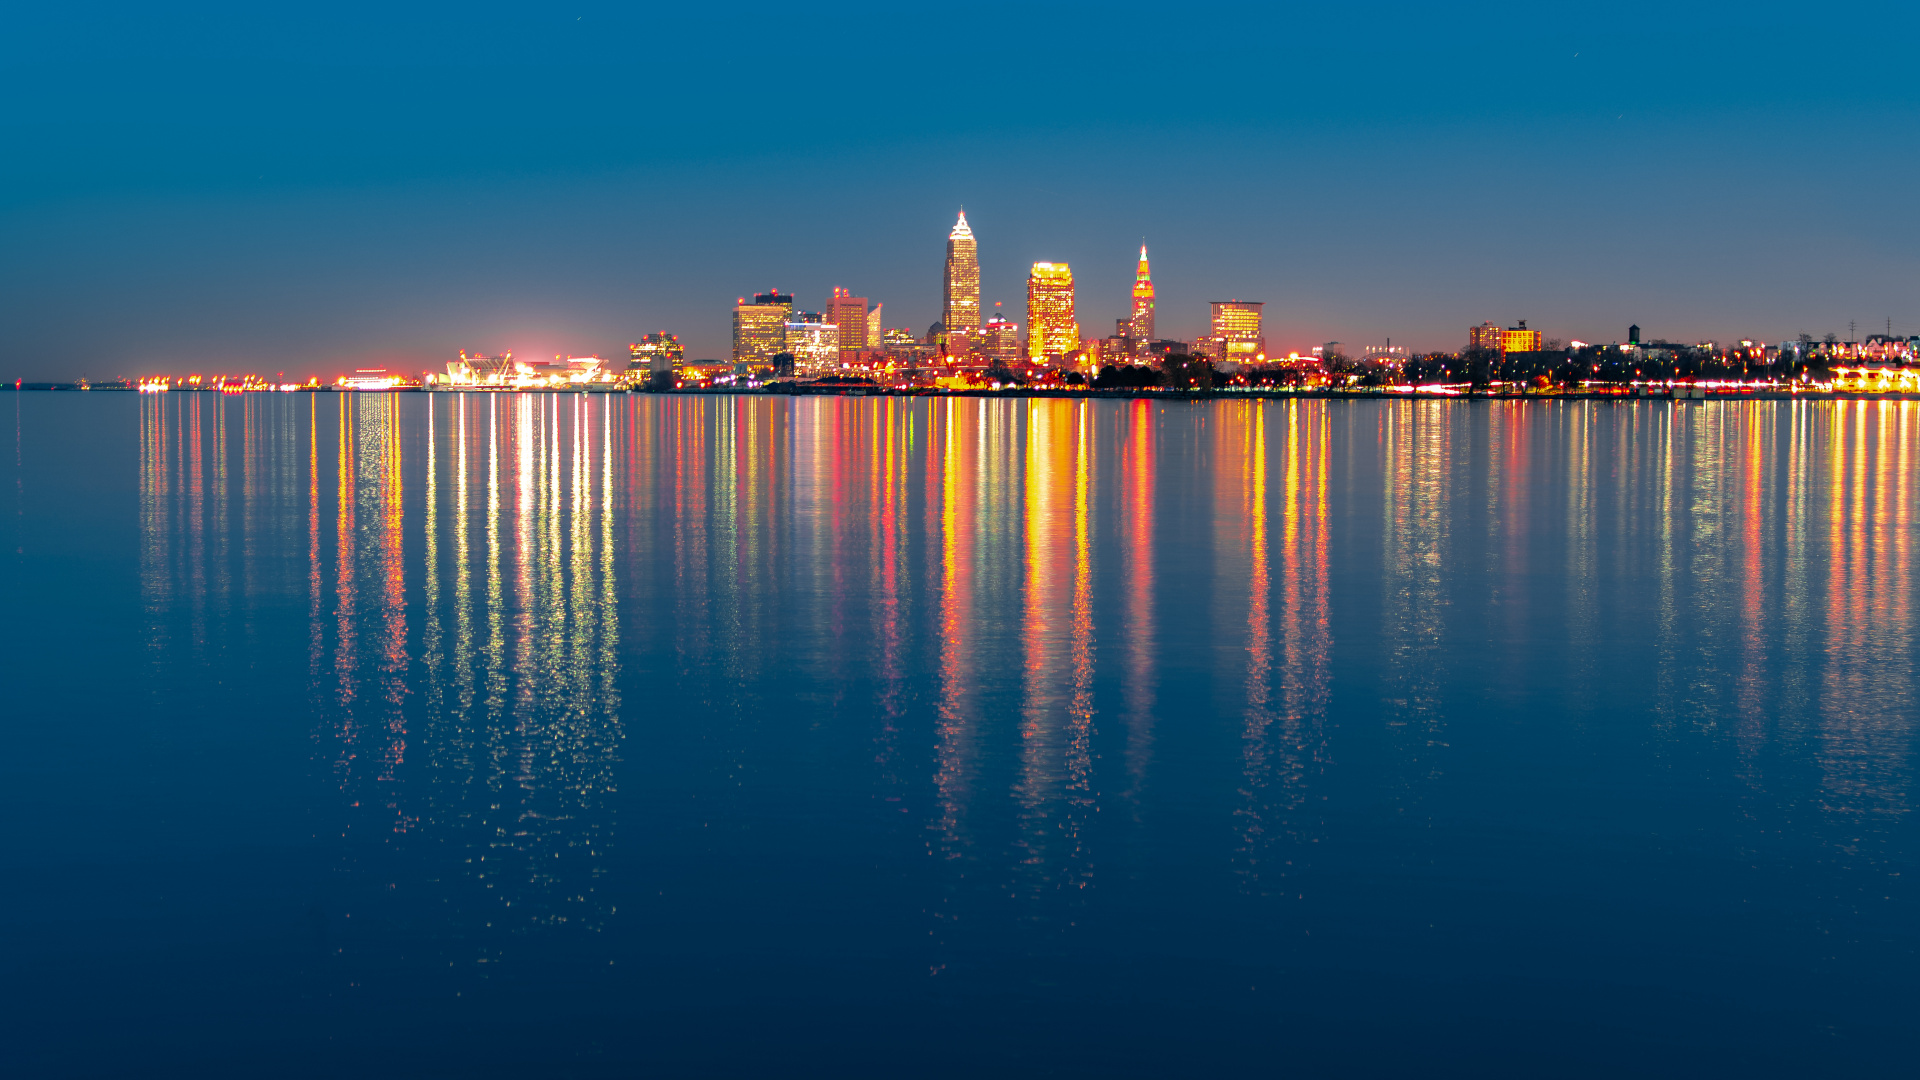 City Skyline Across Body of Water During Night Time. Wallpaper in 1920x1080 Resolution